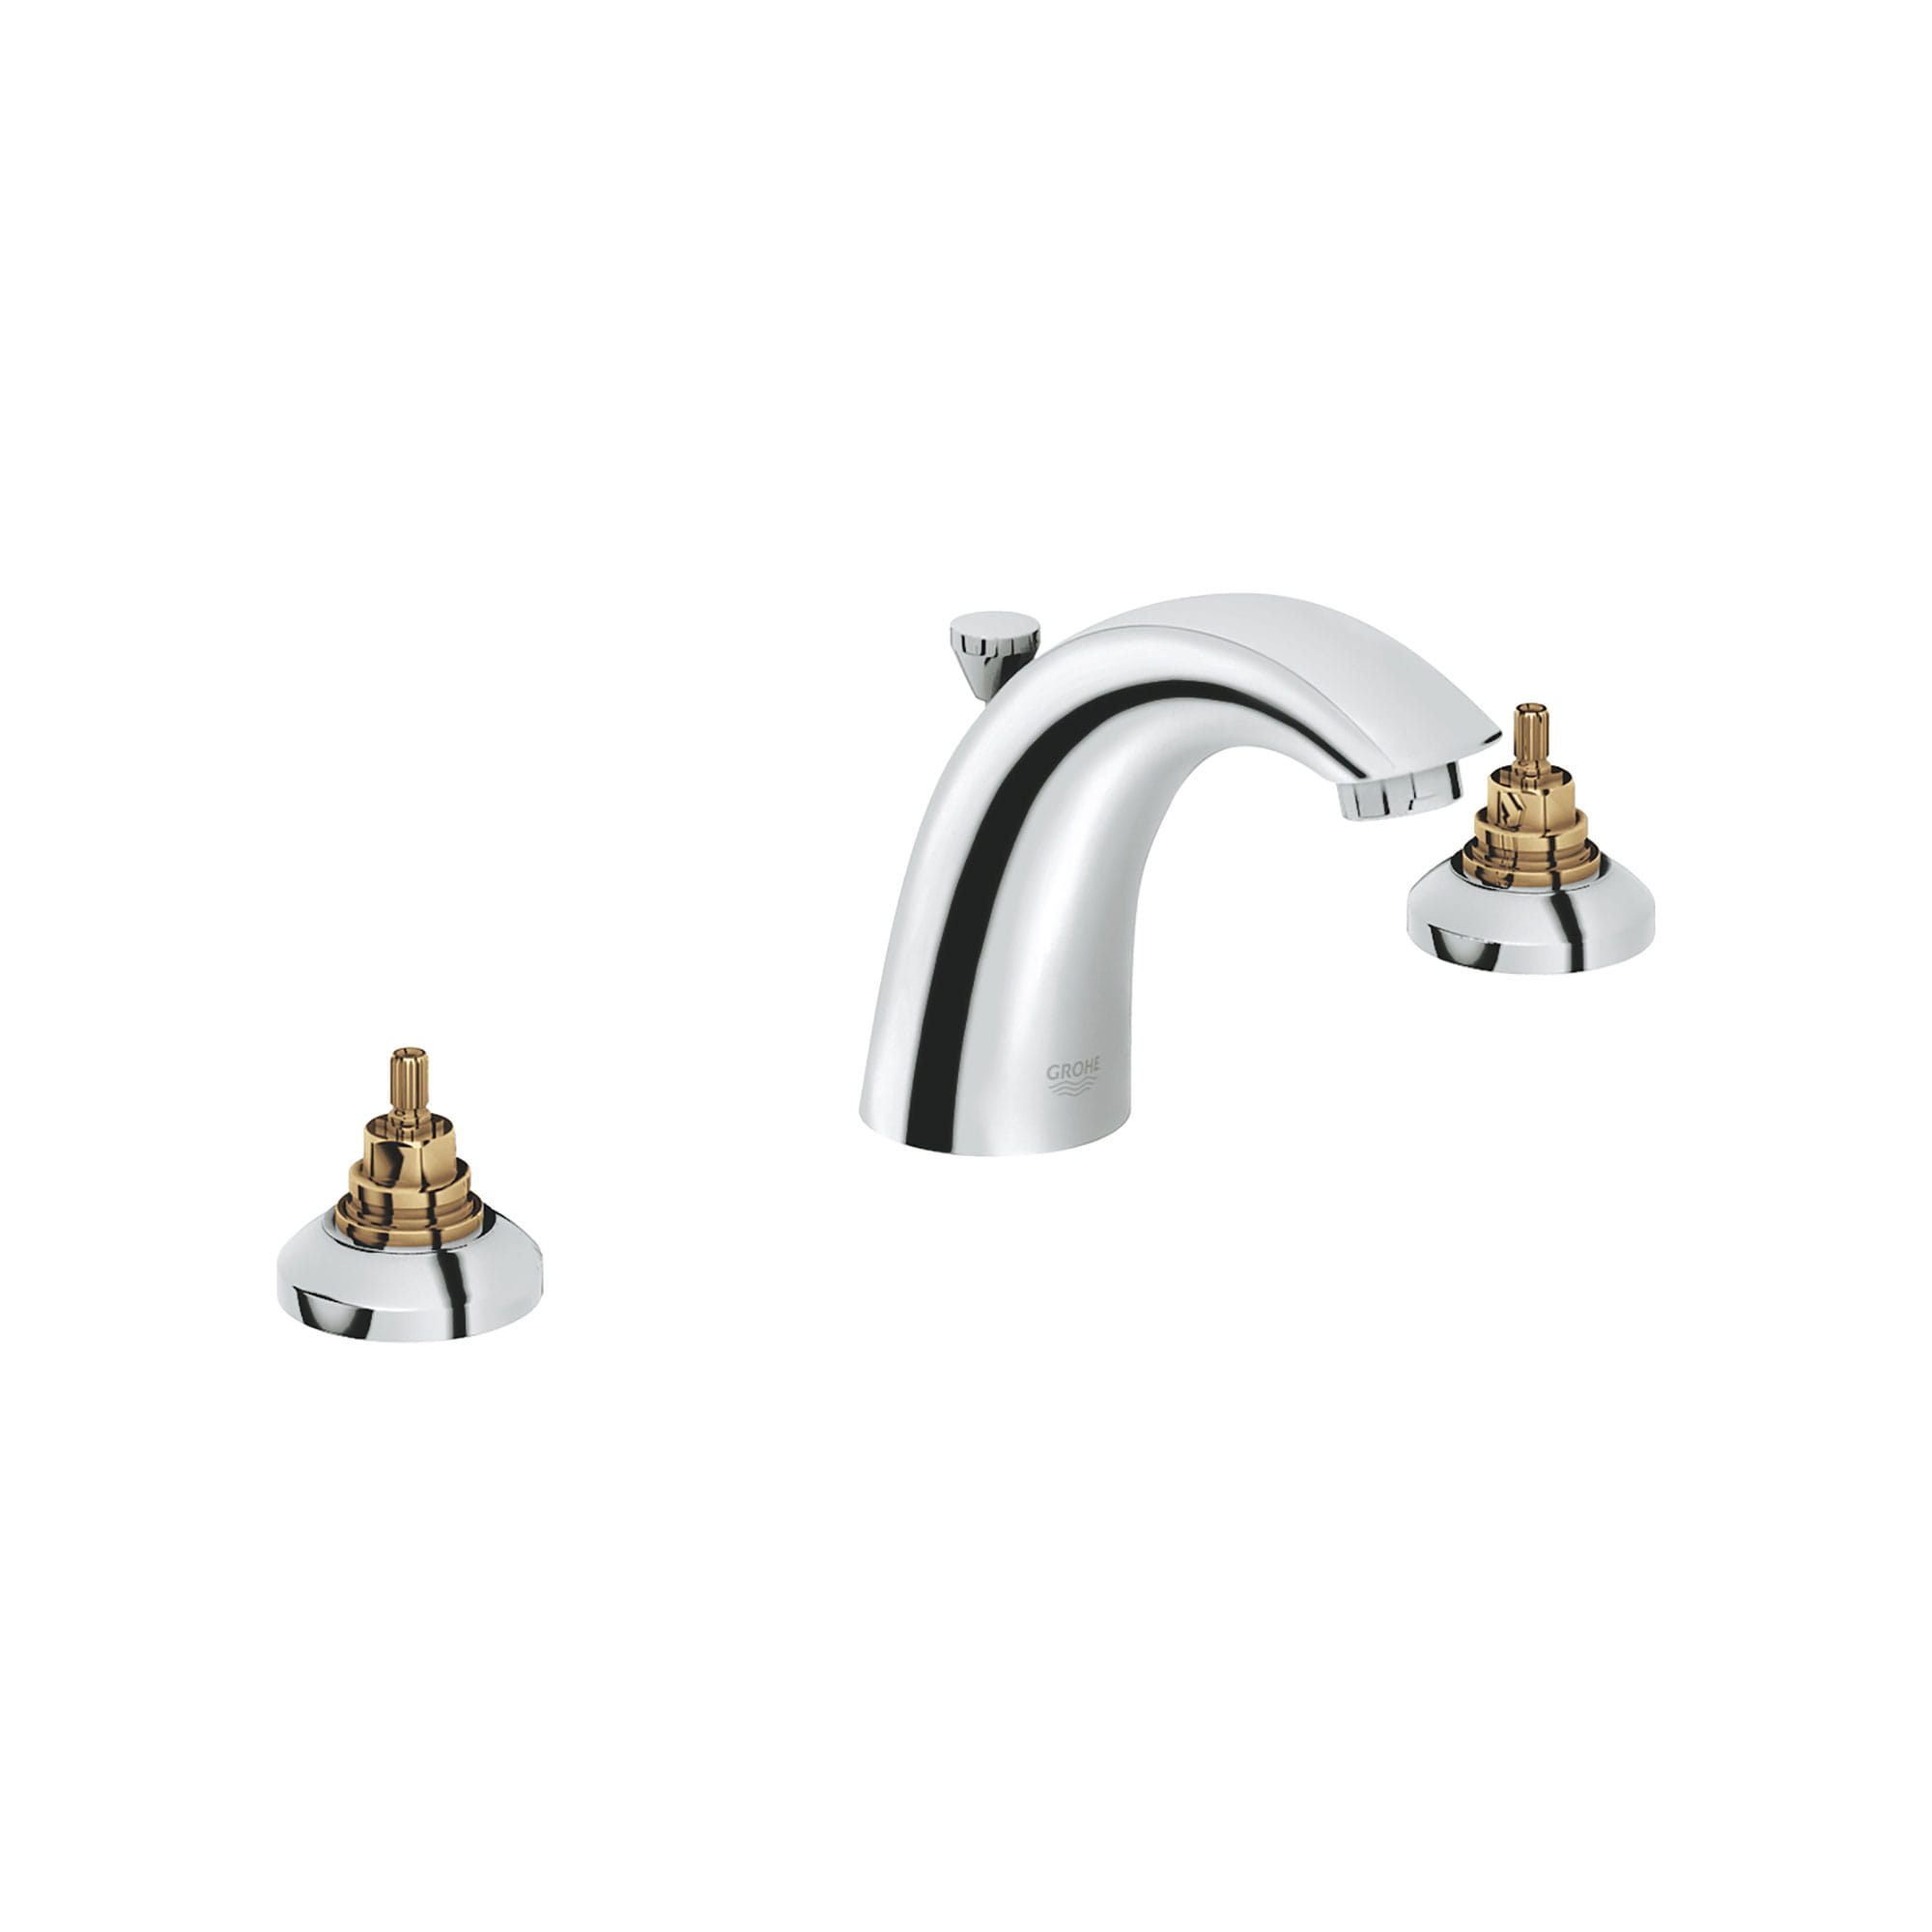 Lavatory 8 in Widespread 2 Handle Bathroom Faucet   12 GPM GROHE CHROME